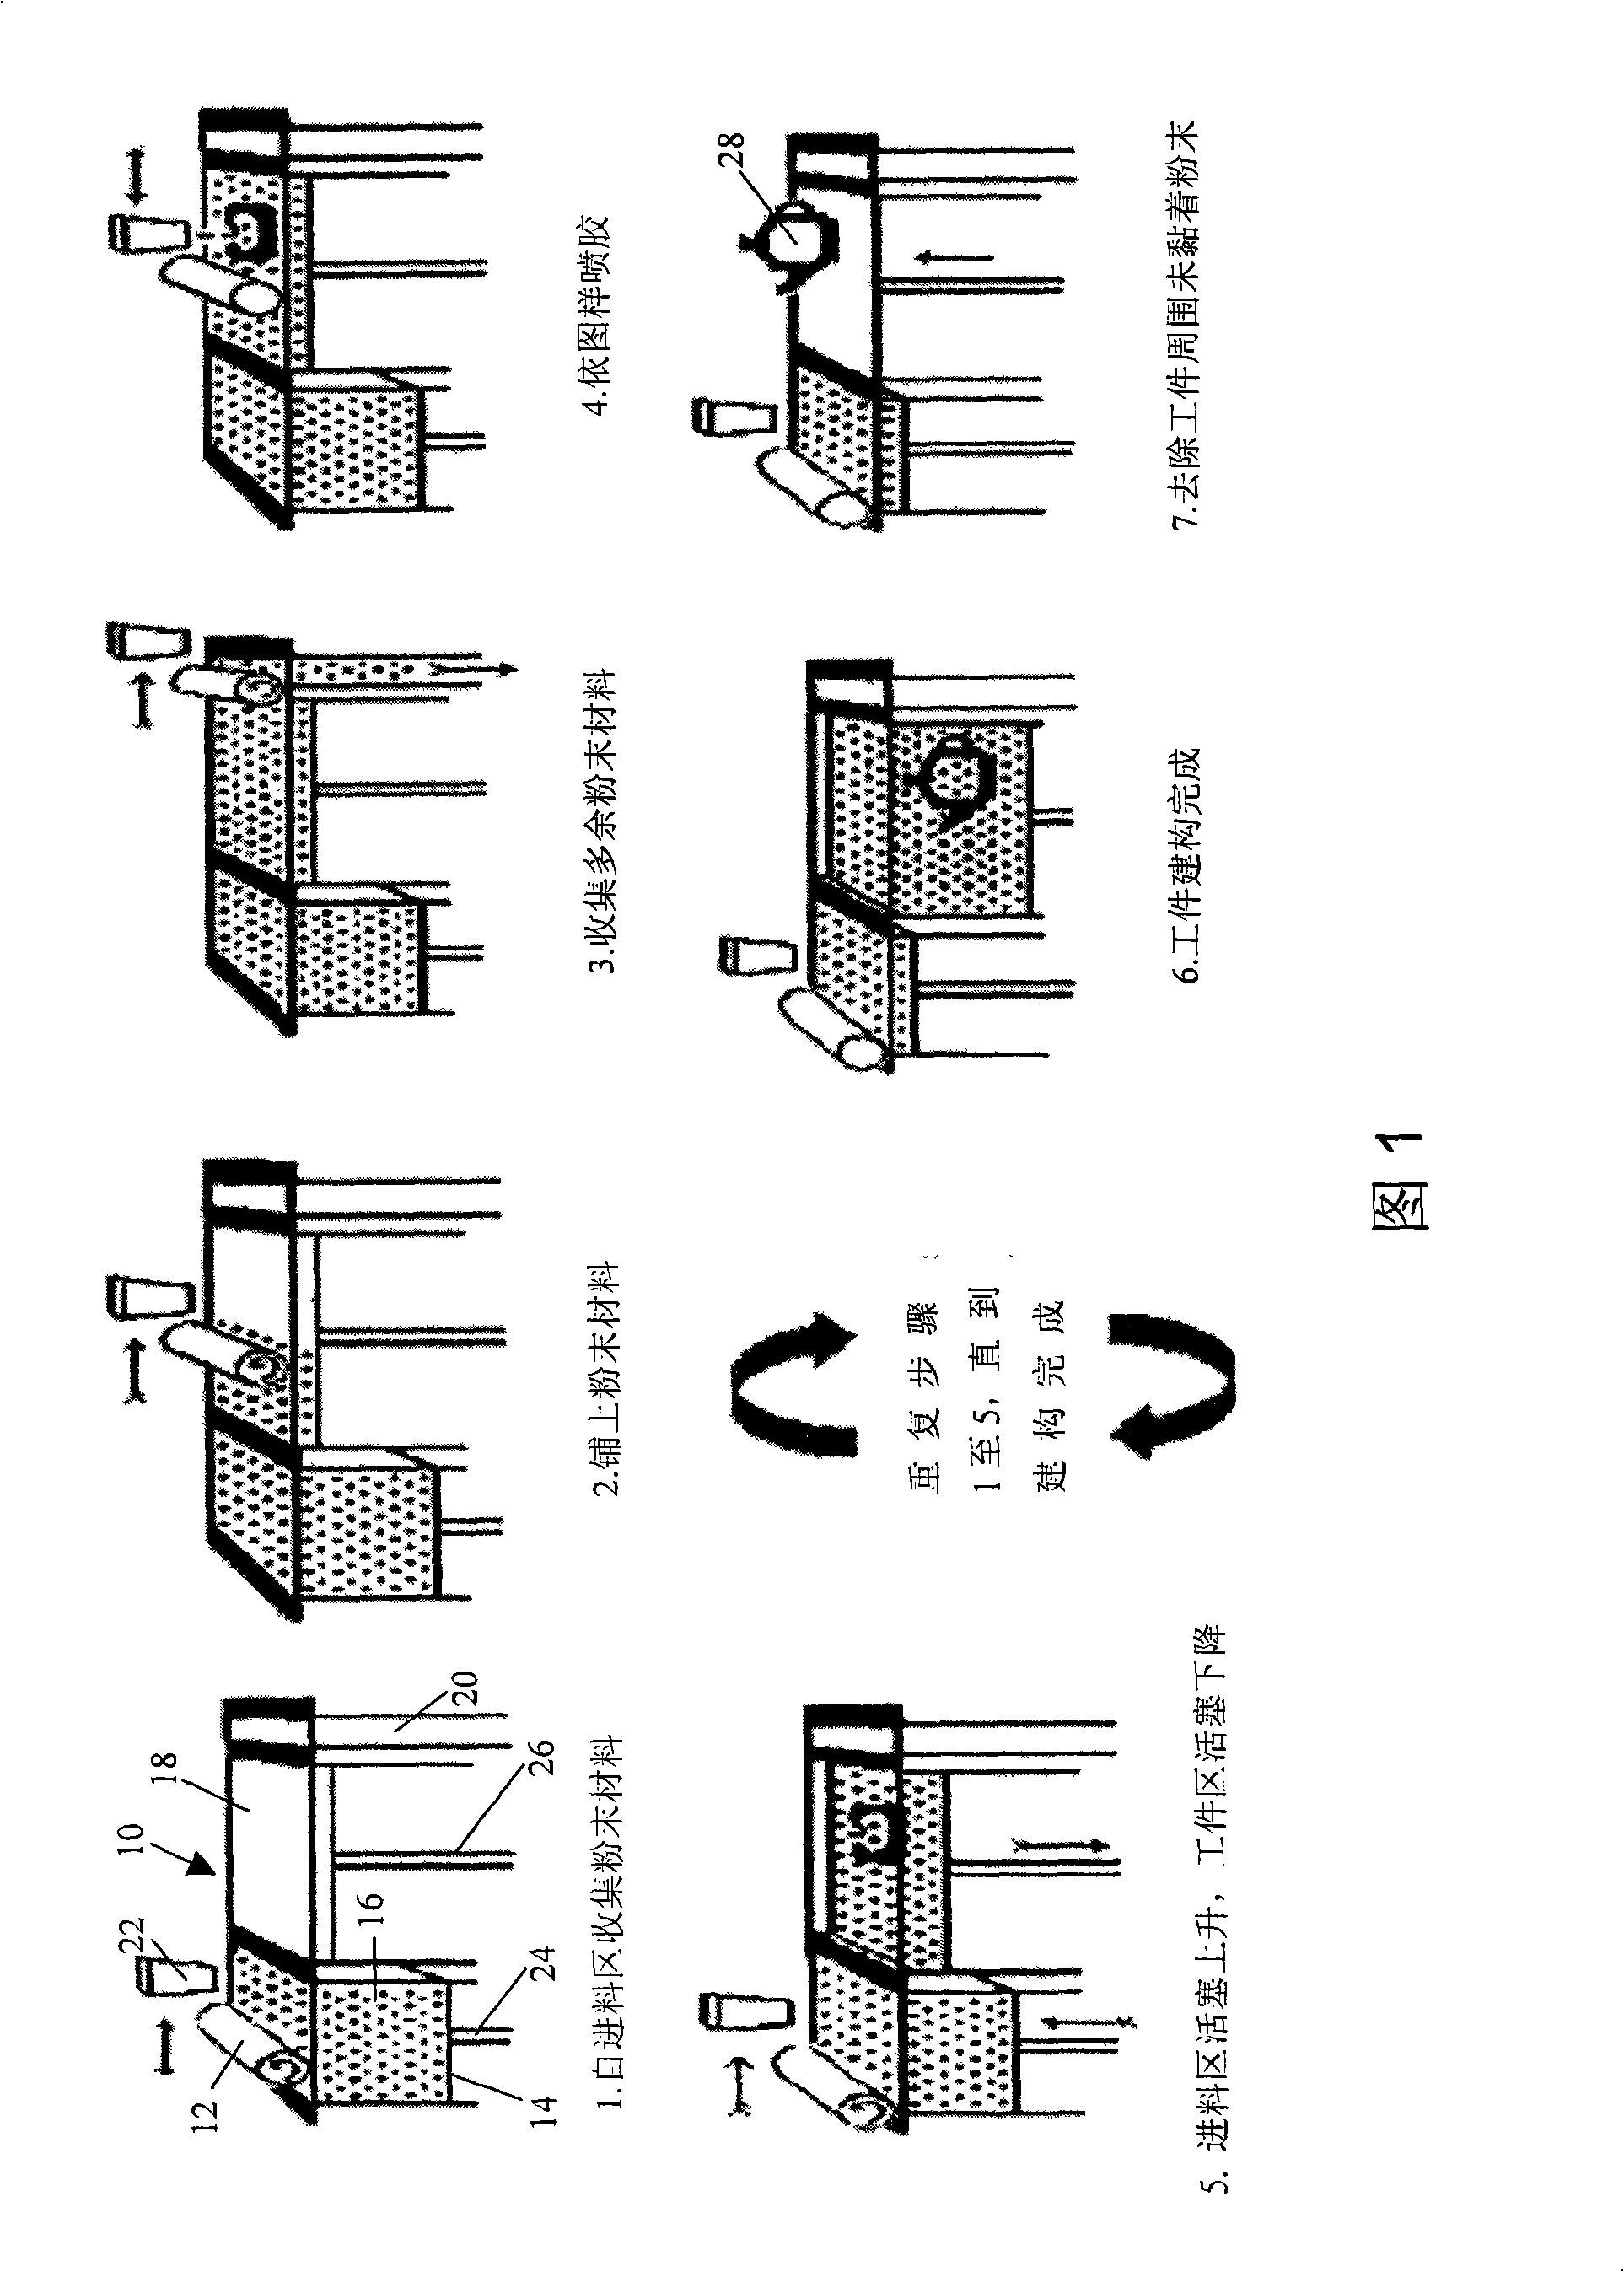 Method for producing three-dimensional contouring food product with rapid prototyping technology